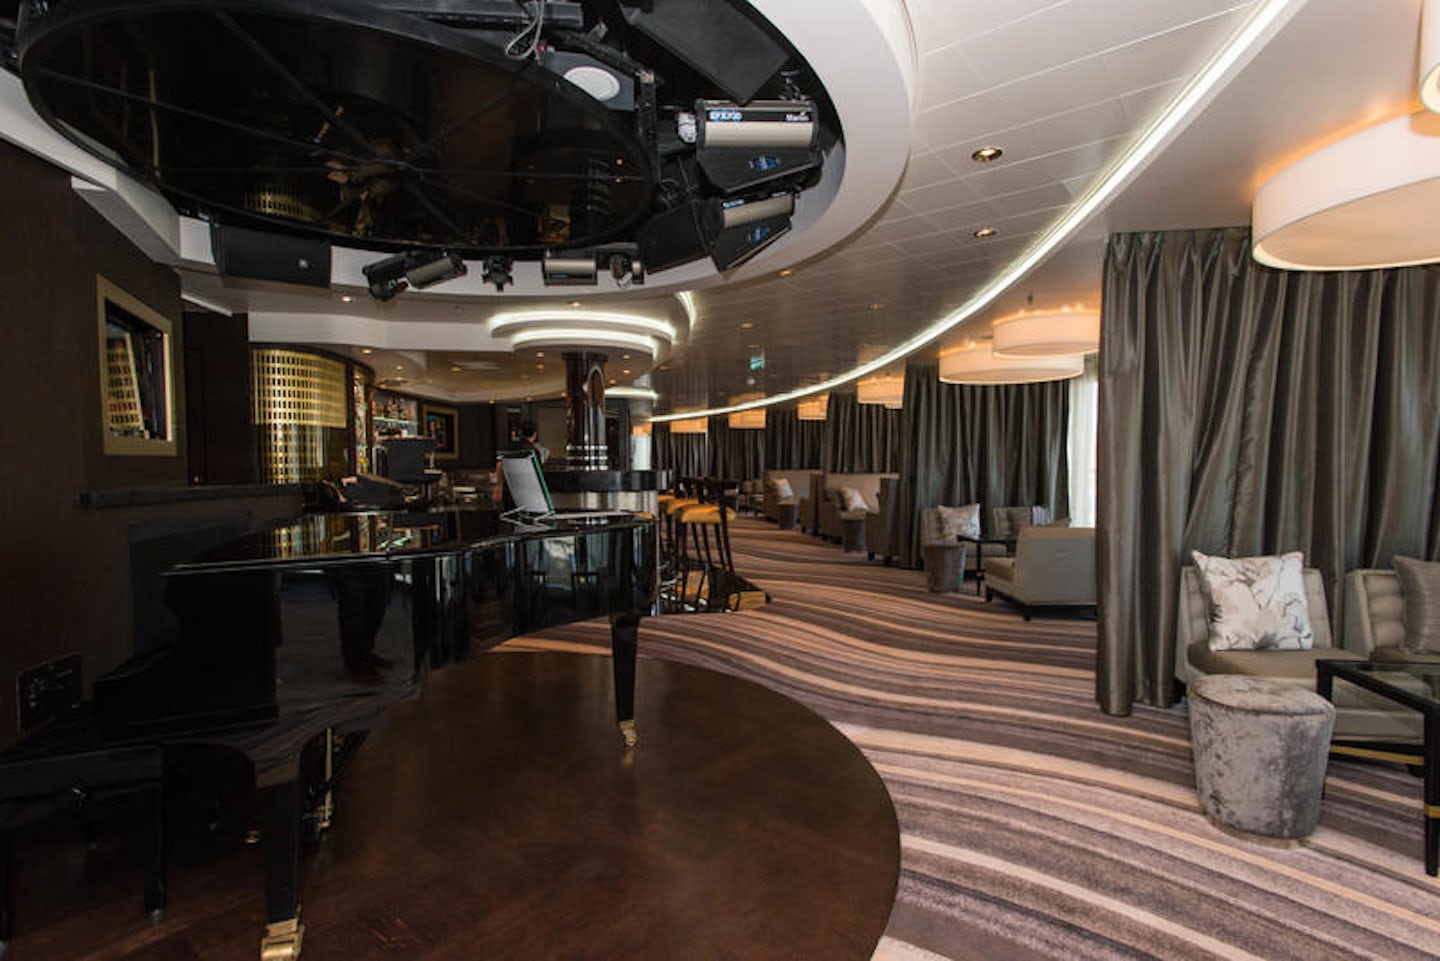 The Epic Club on Norwegian Epic